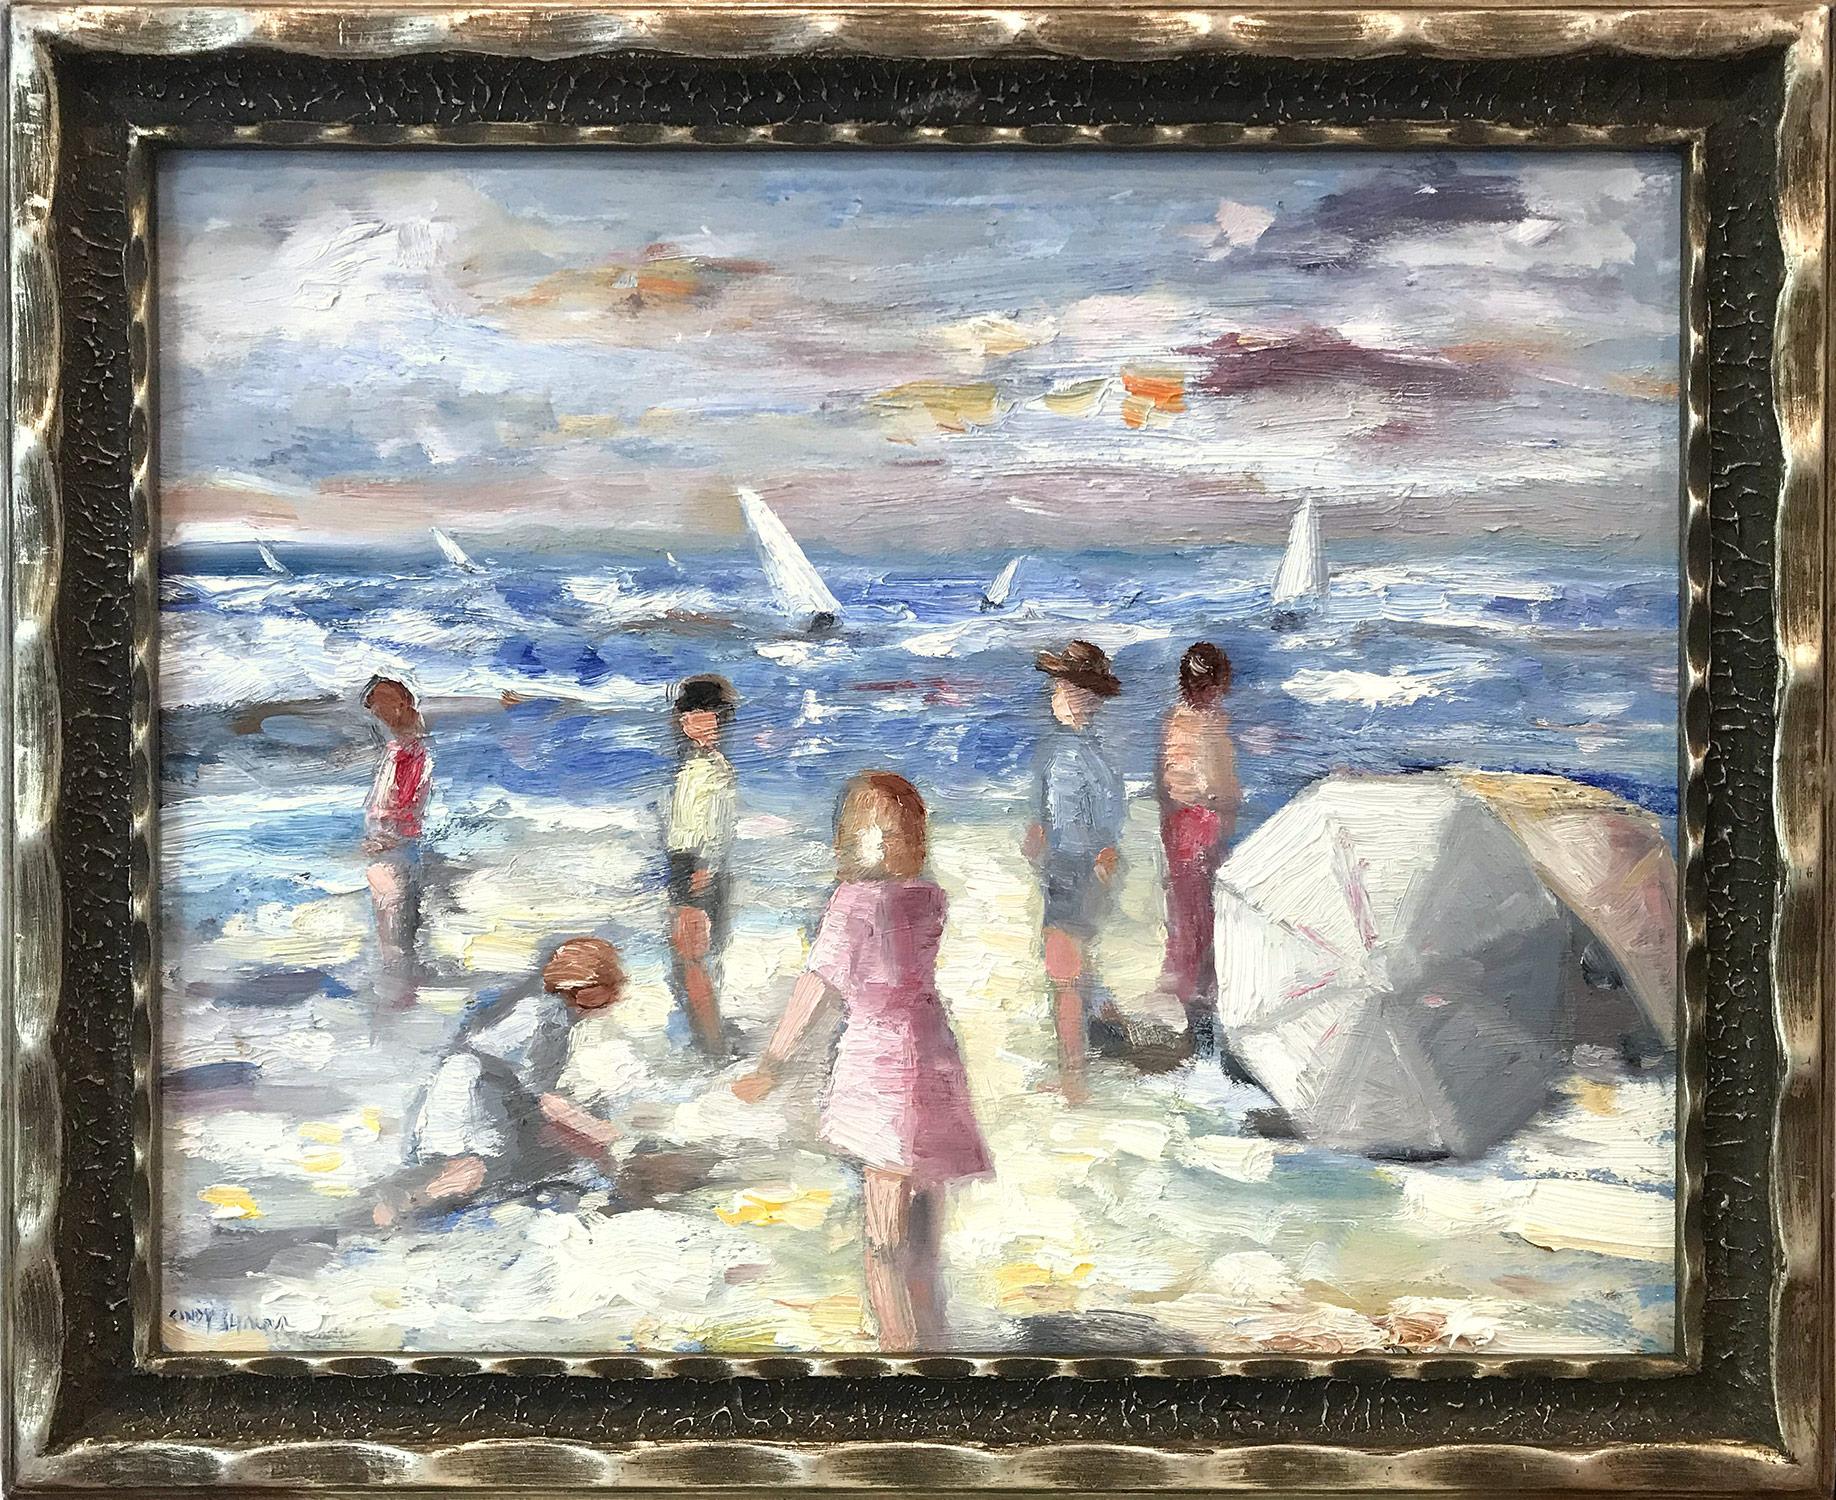 Cindy Shaoul Landscape Painting - "A Day at the Beach" Colorful Impressionistic Beach Scene Oil Painting on Panel